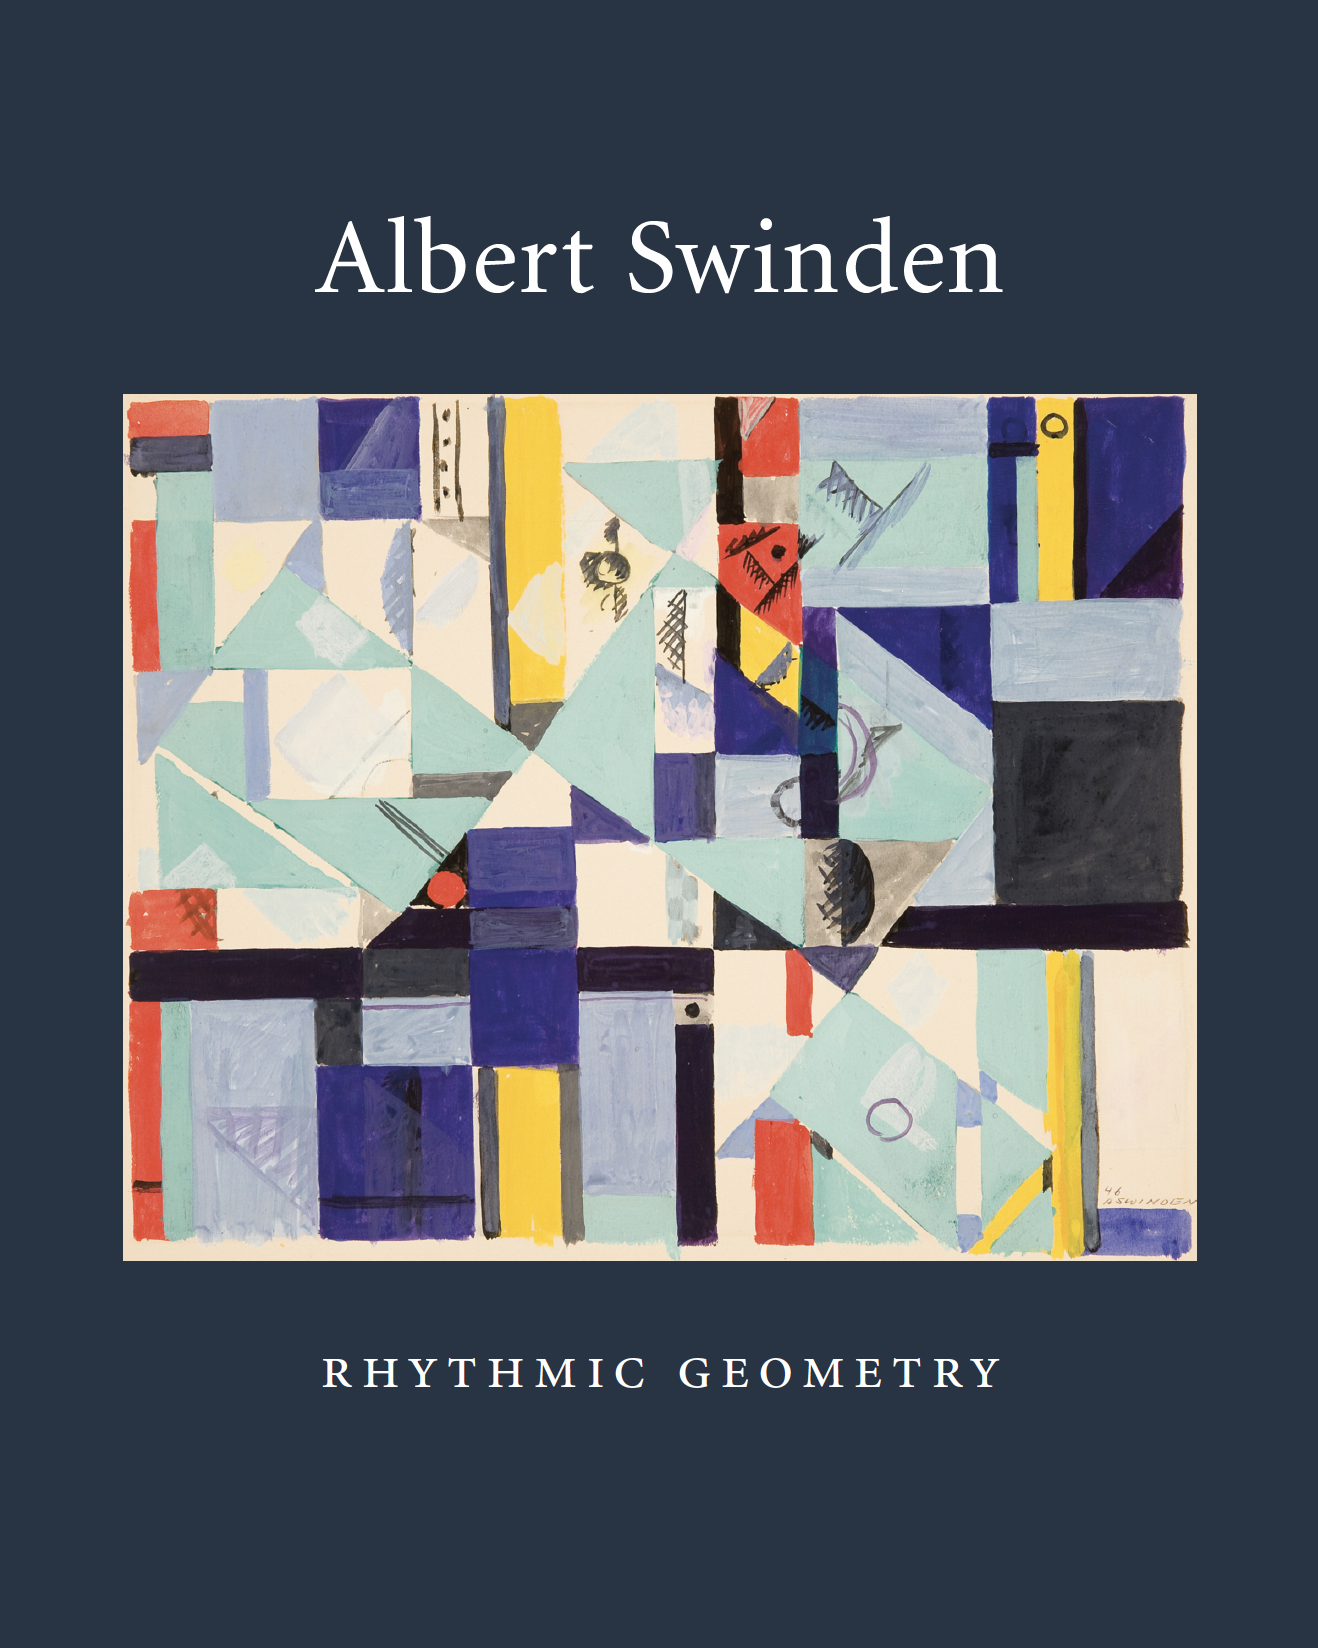 Albert Swinden: # Rhythmic Geometry # 2011 &lt;alt="Catalogue cover with title and an abstract geometric gouache in blues, black, red, and yellow."&gt; 